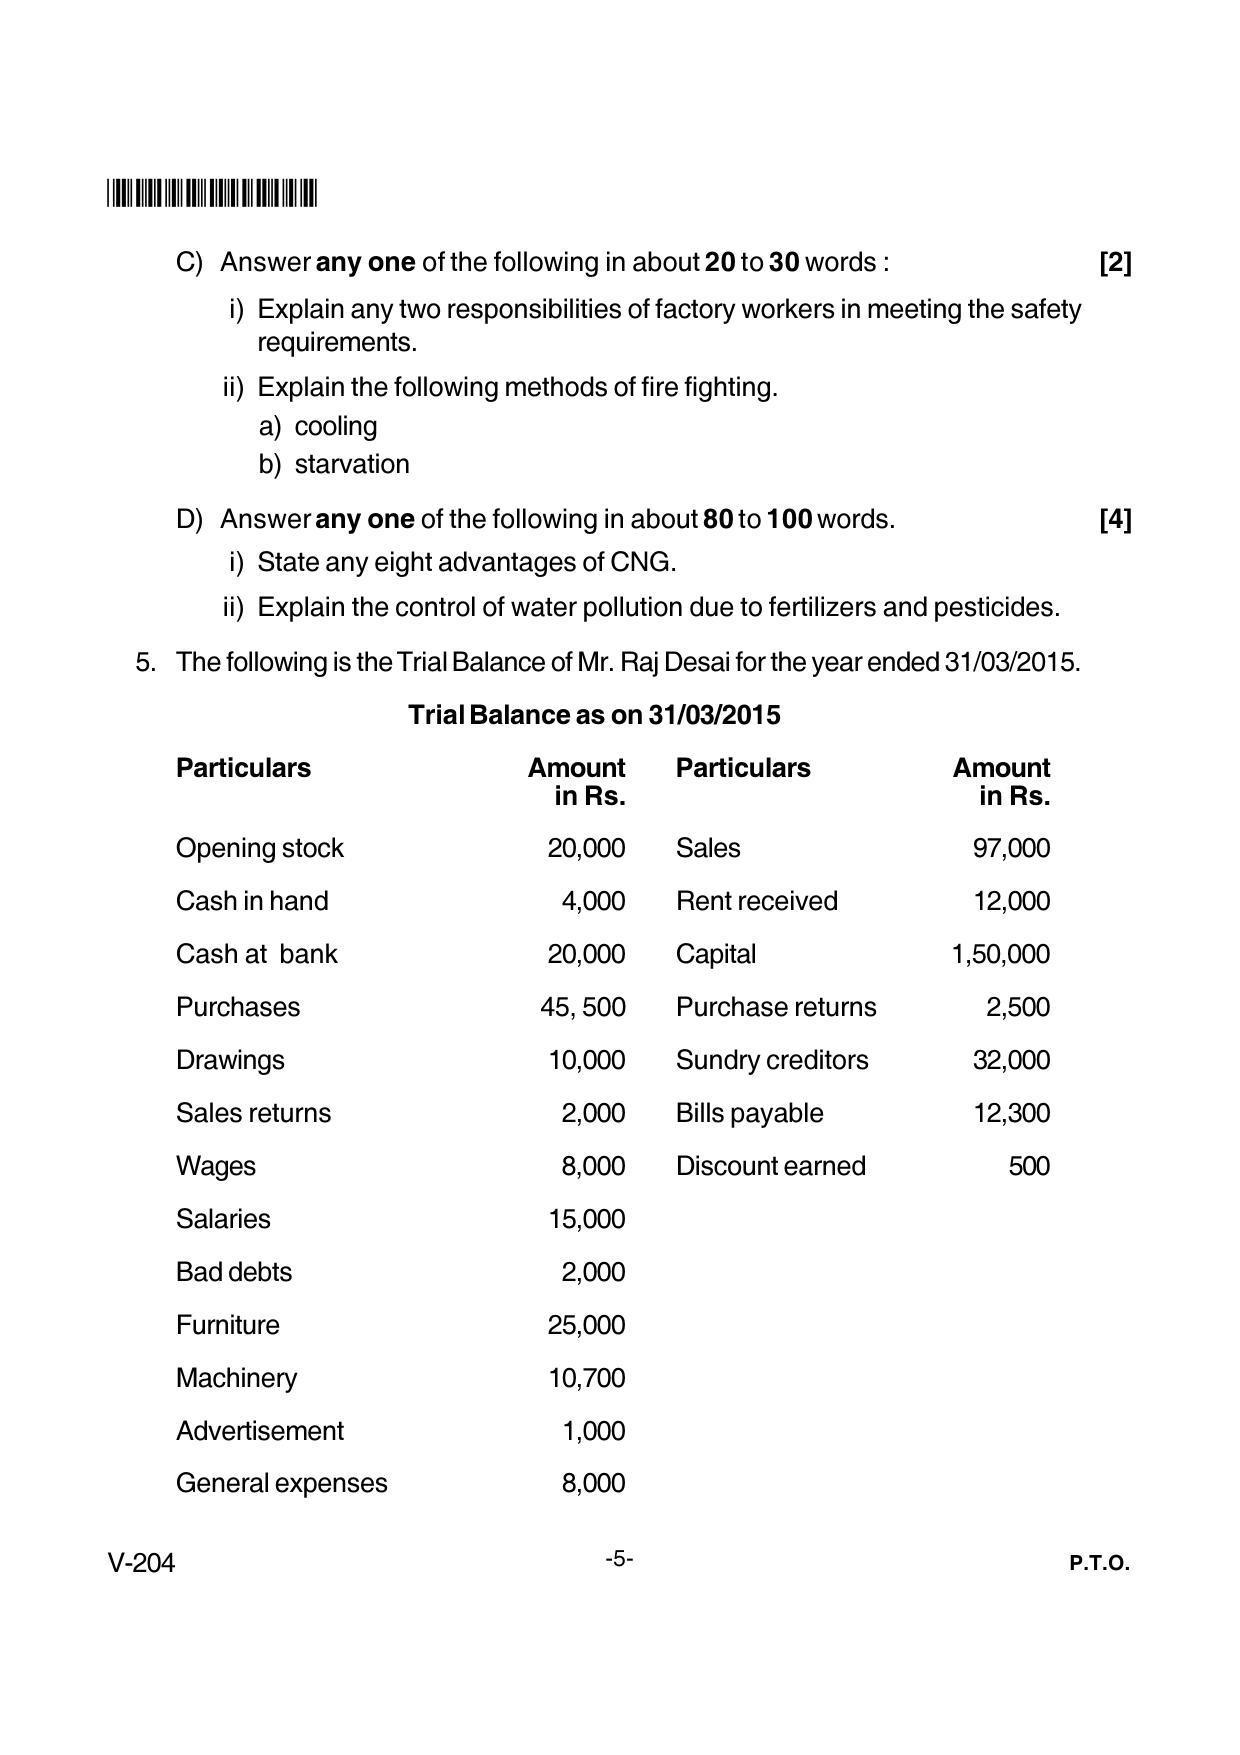 Goa Board Class 12 General Foundation Course (CWSN)  Voc 204 Cwsn (1) (June 2018) Question Paper - Page 5